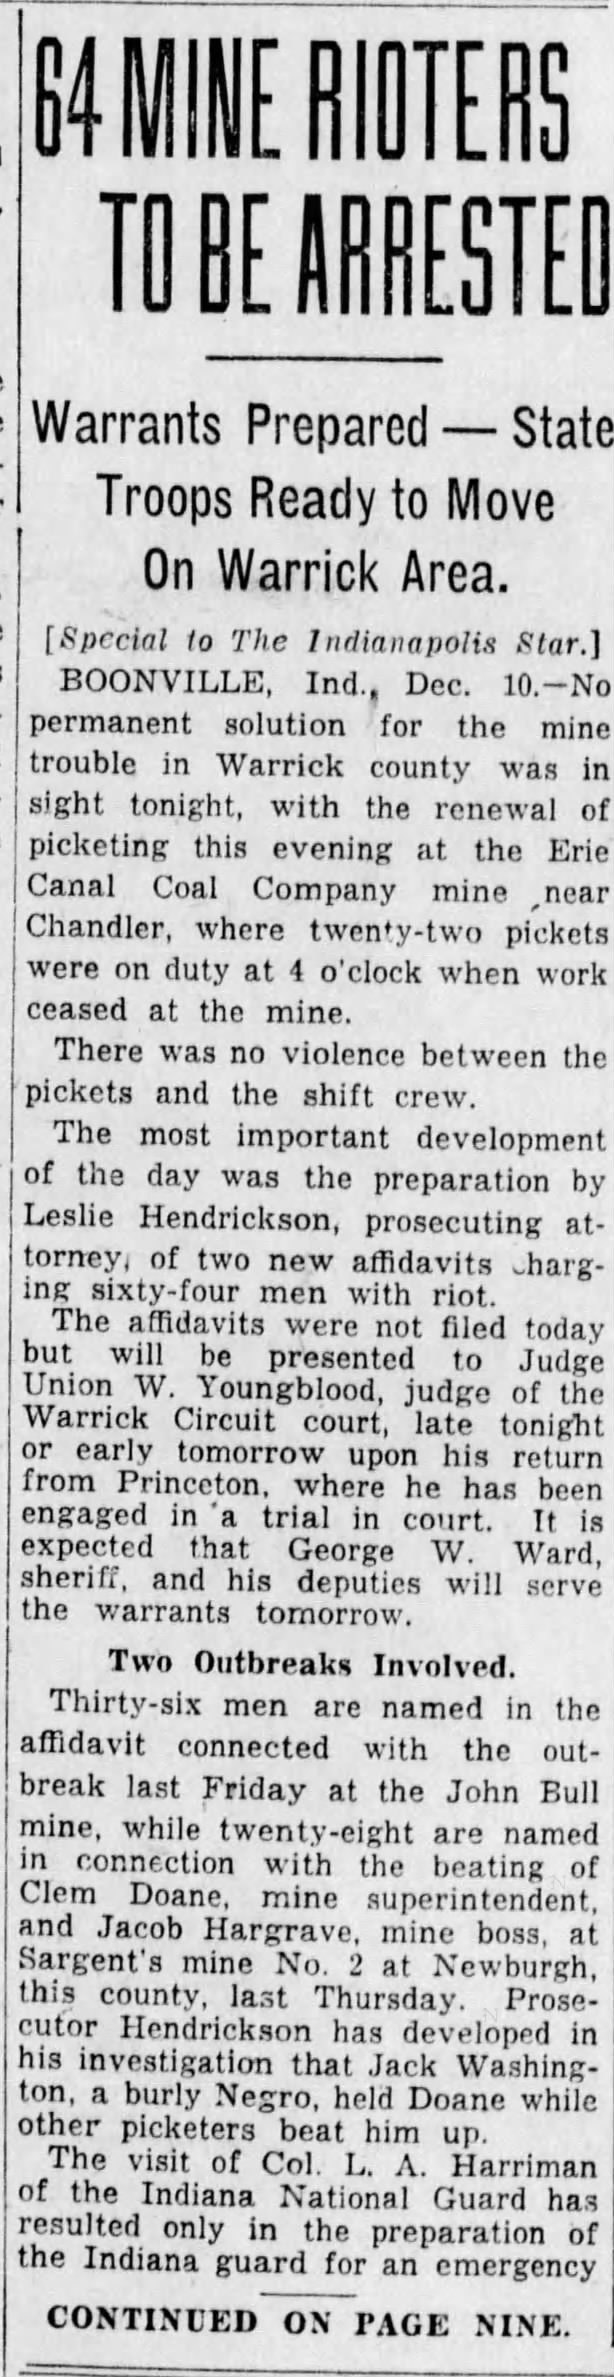 The Indianapolis Star (Indianapolis, Indiana) 11 Dec 1929, Wed Page 1